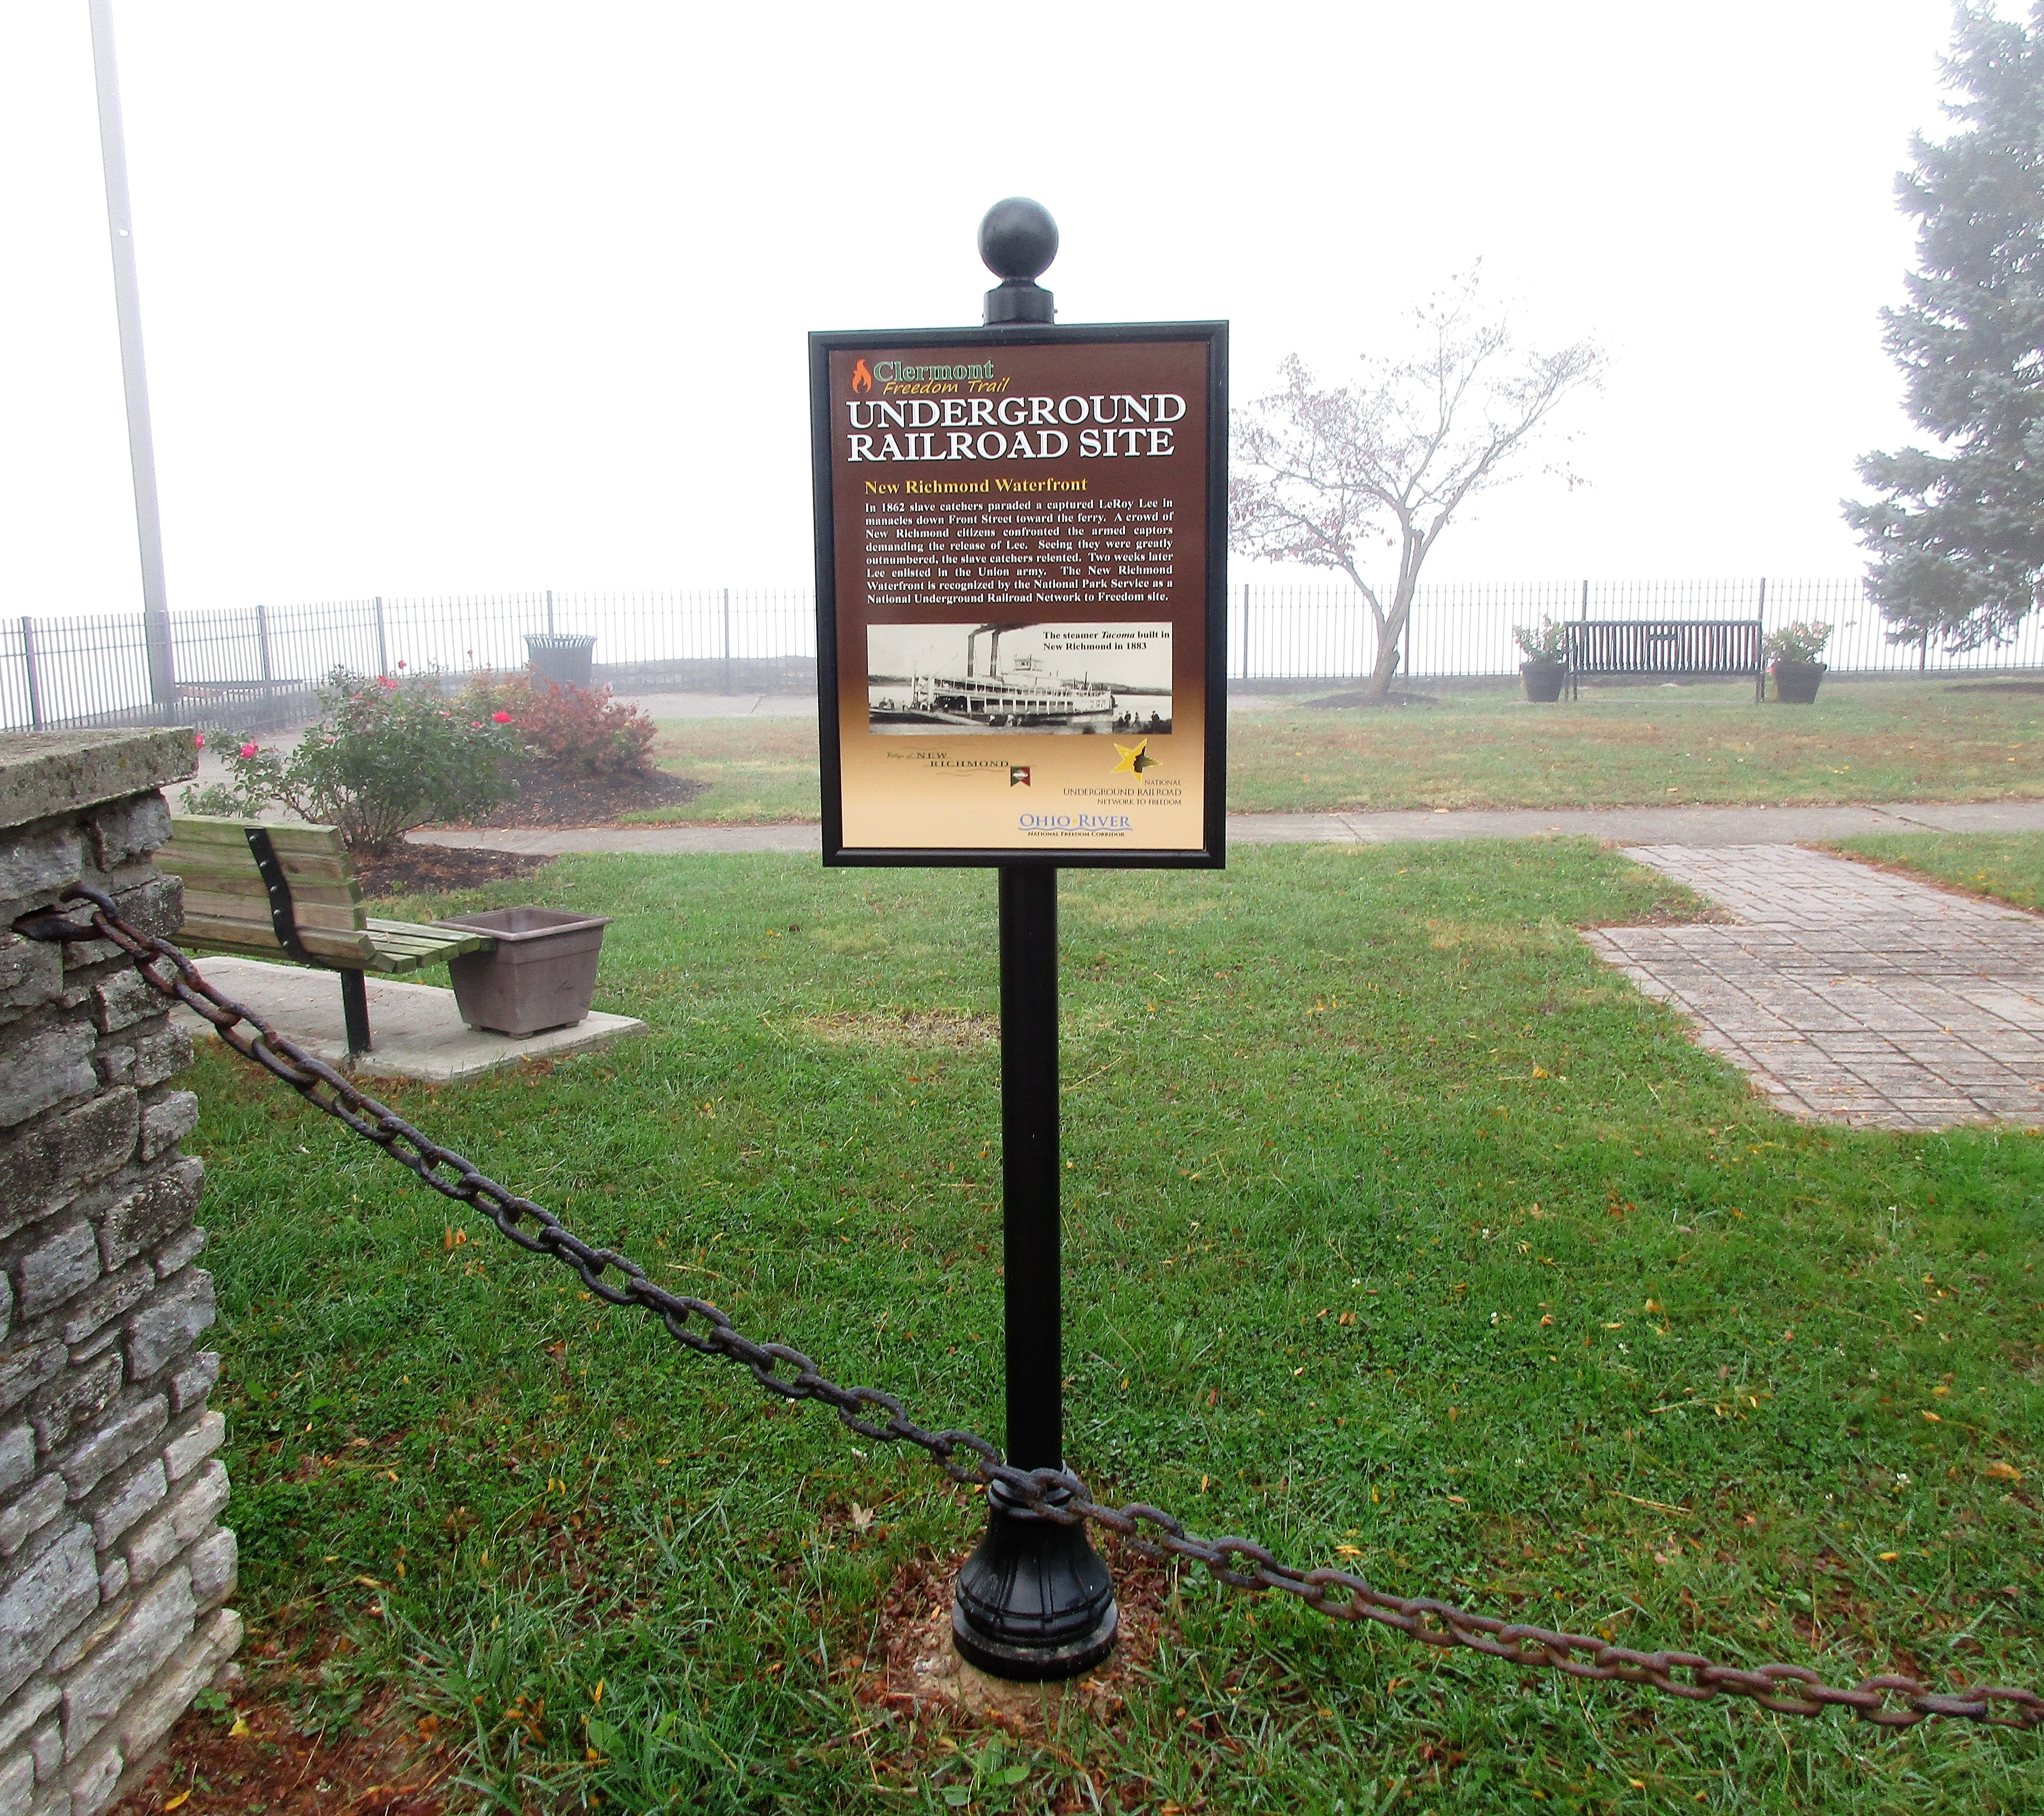 The New Richmond waterfront marker is located adjacent to the New Richmond historical marker